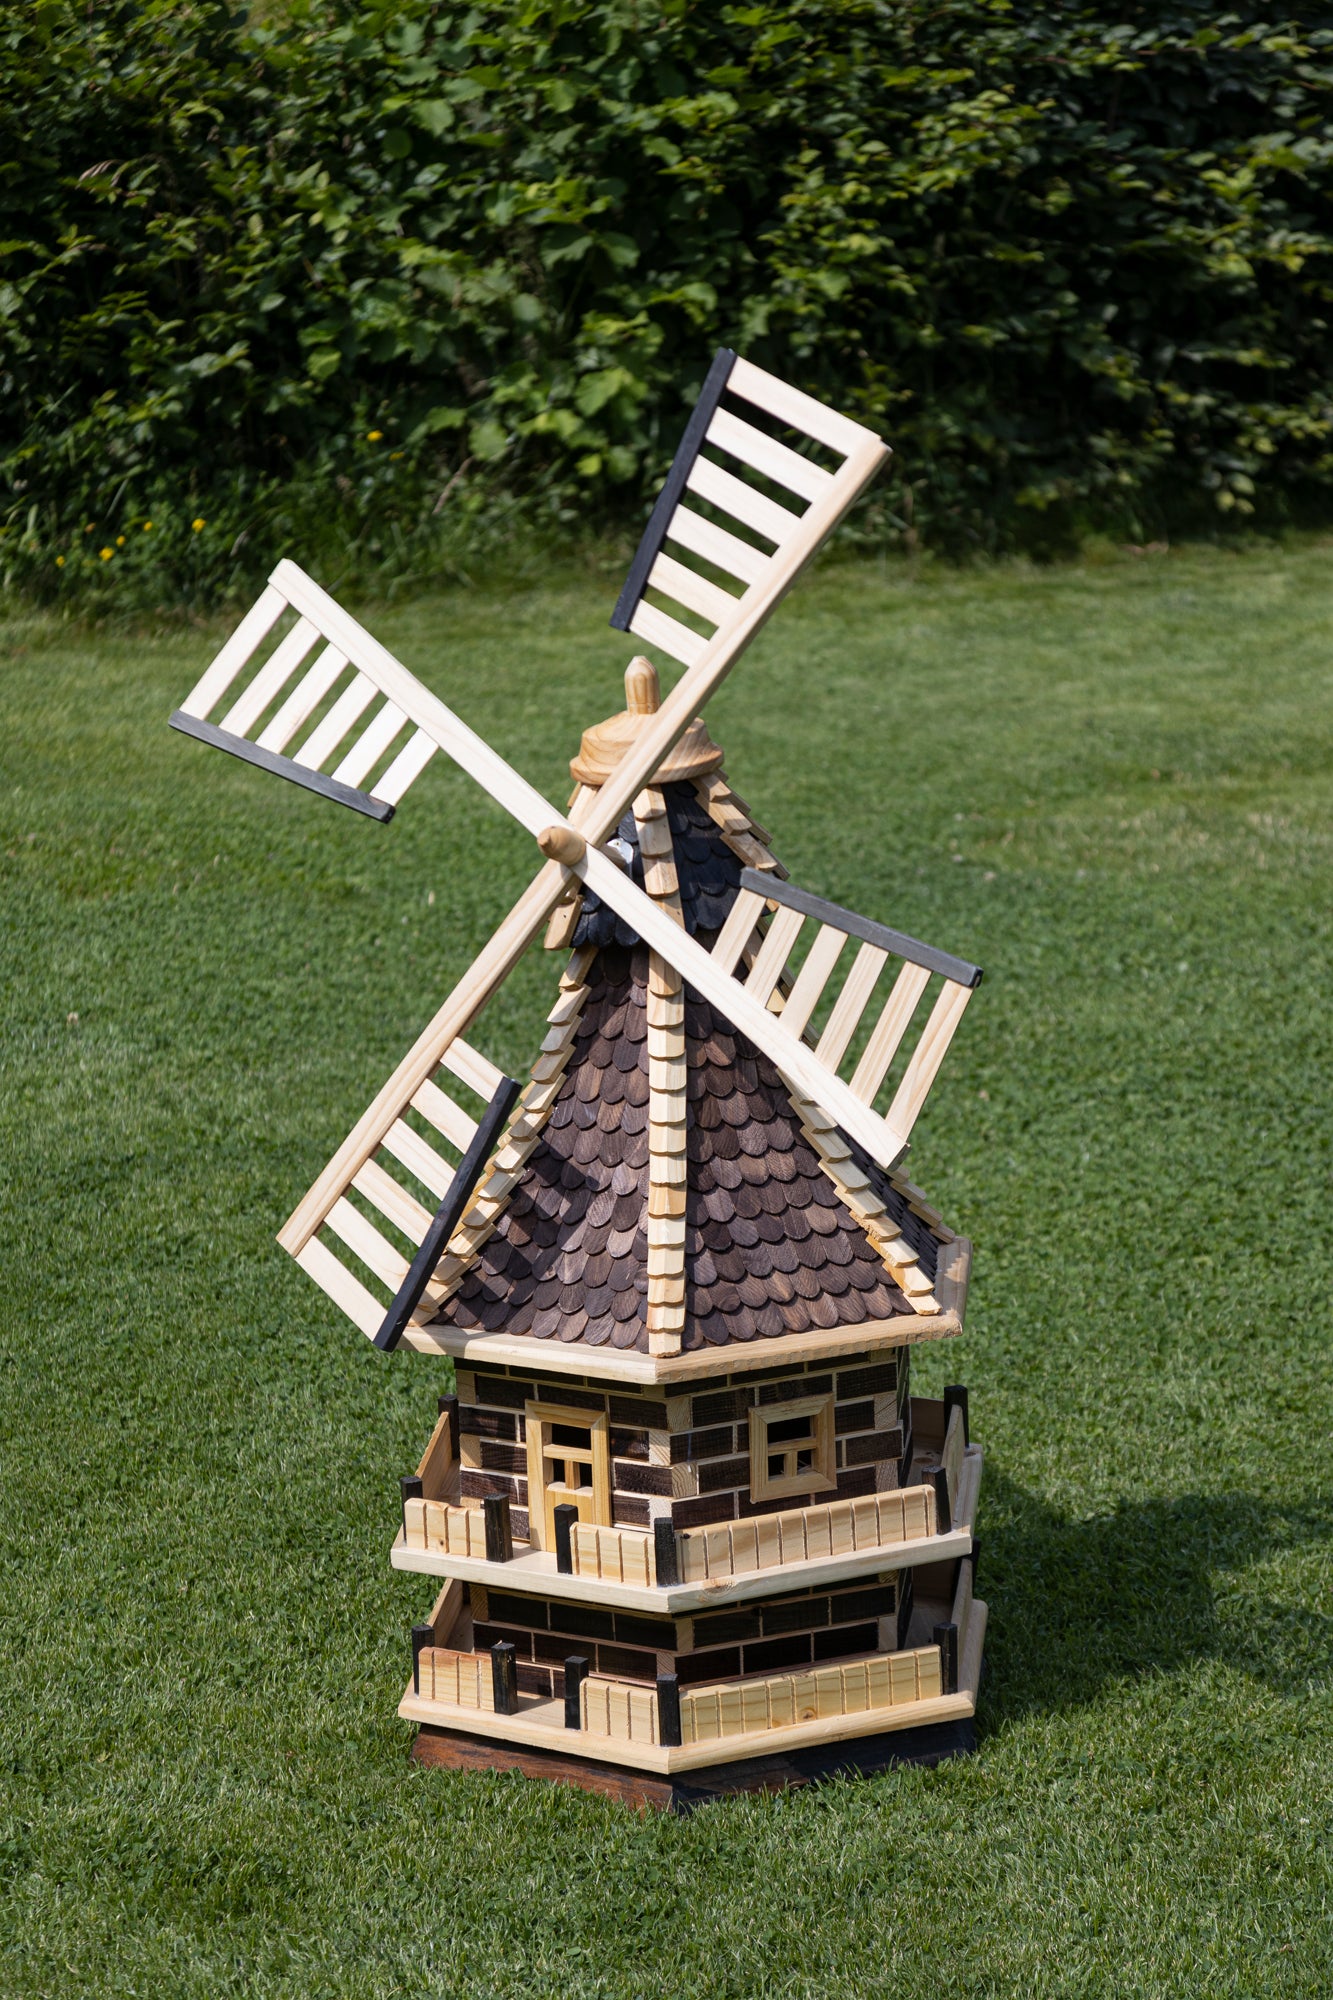 Wooden windmill, two-story, with black wooden shingle roof